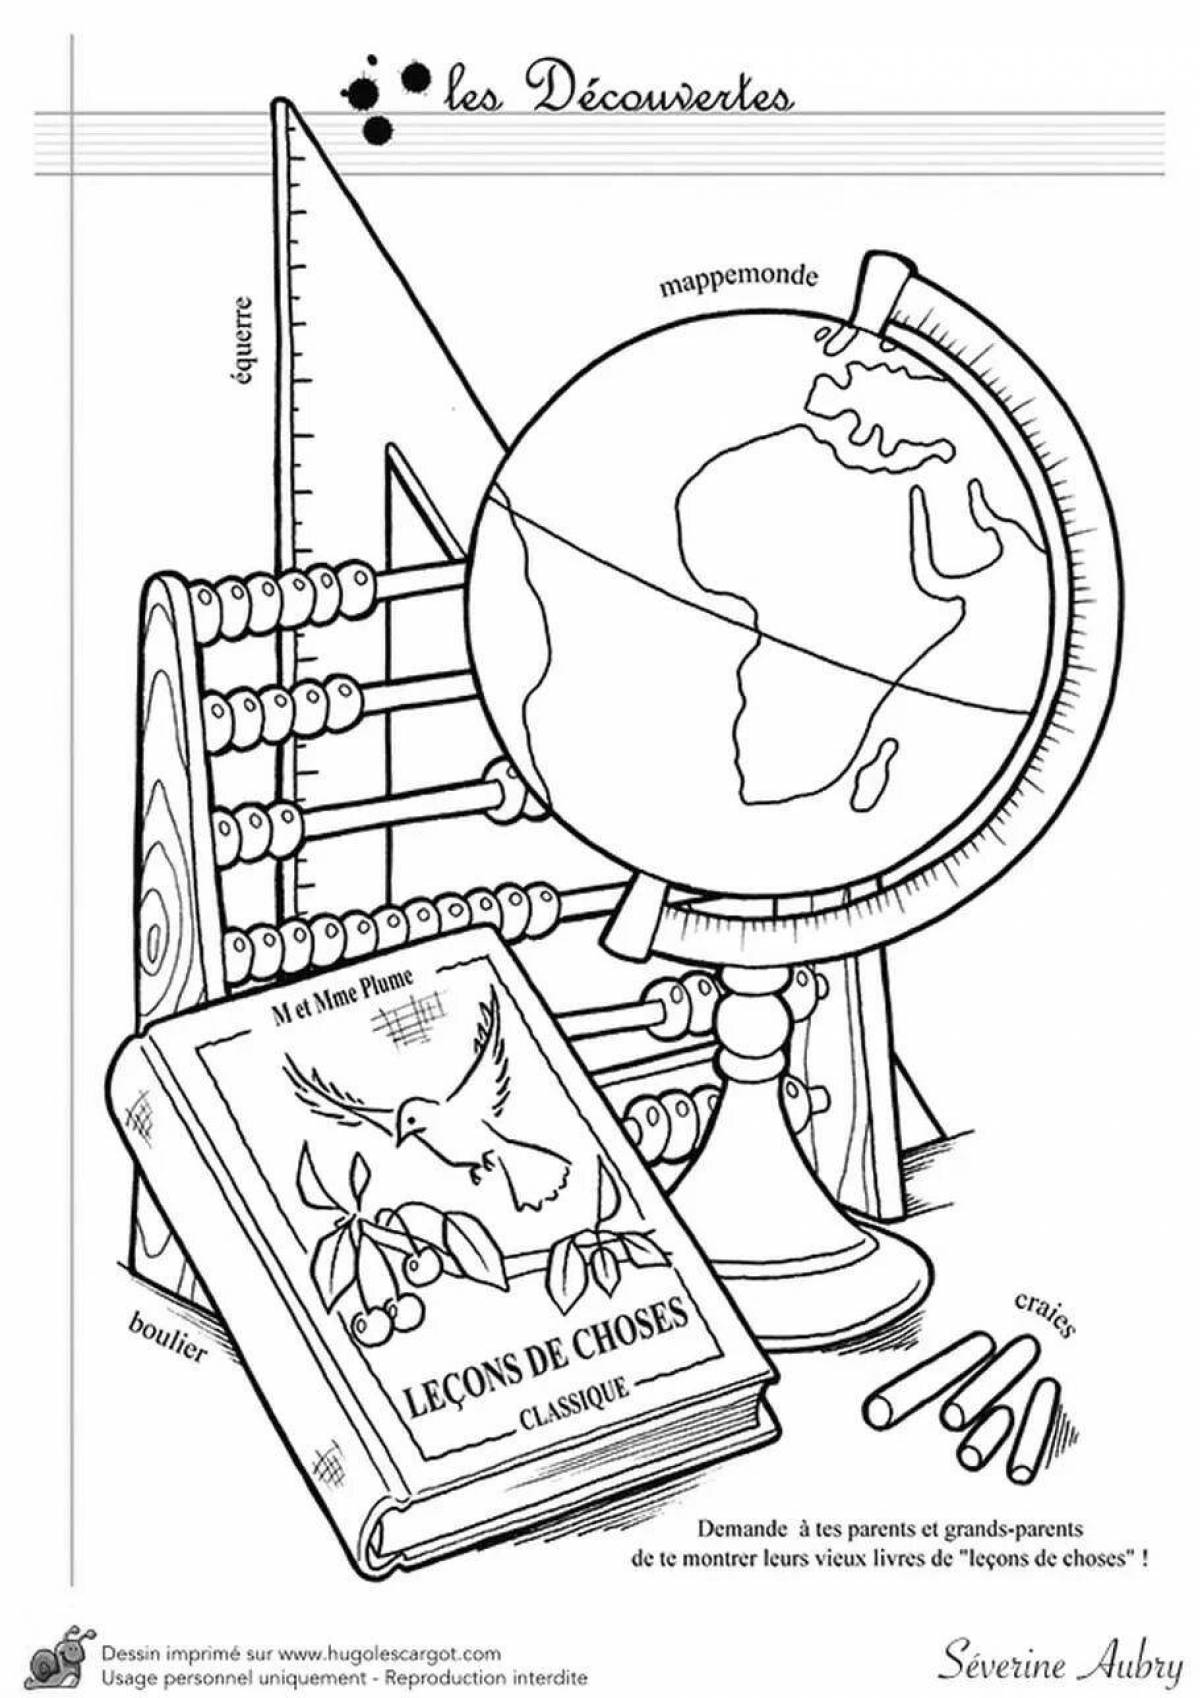 Tempting russian constitution coloring book for kids